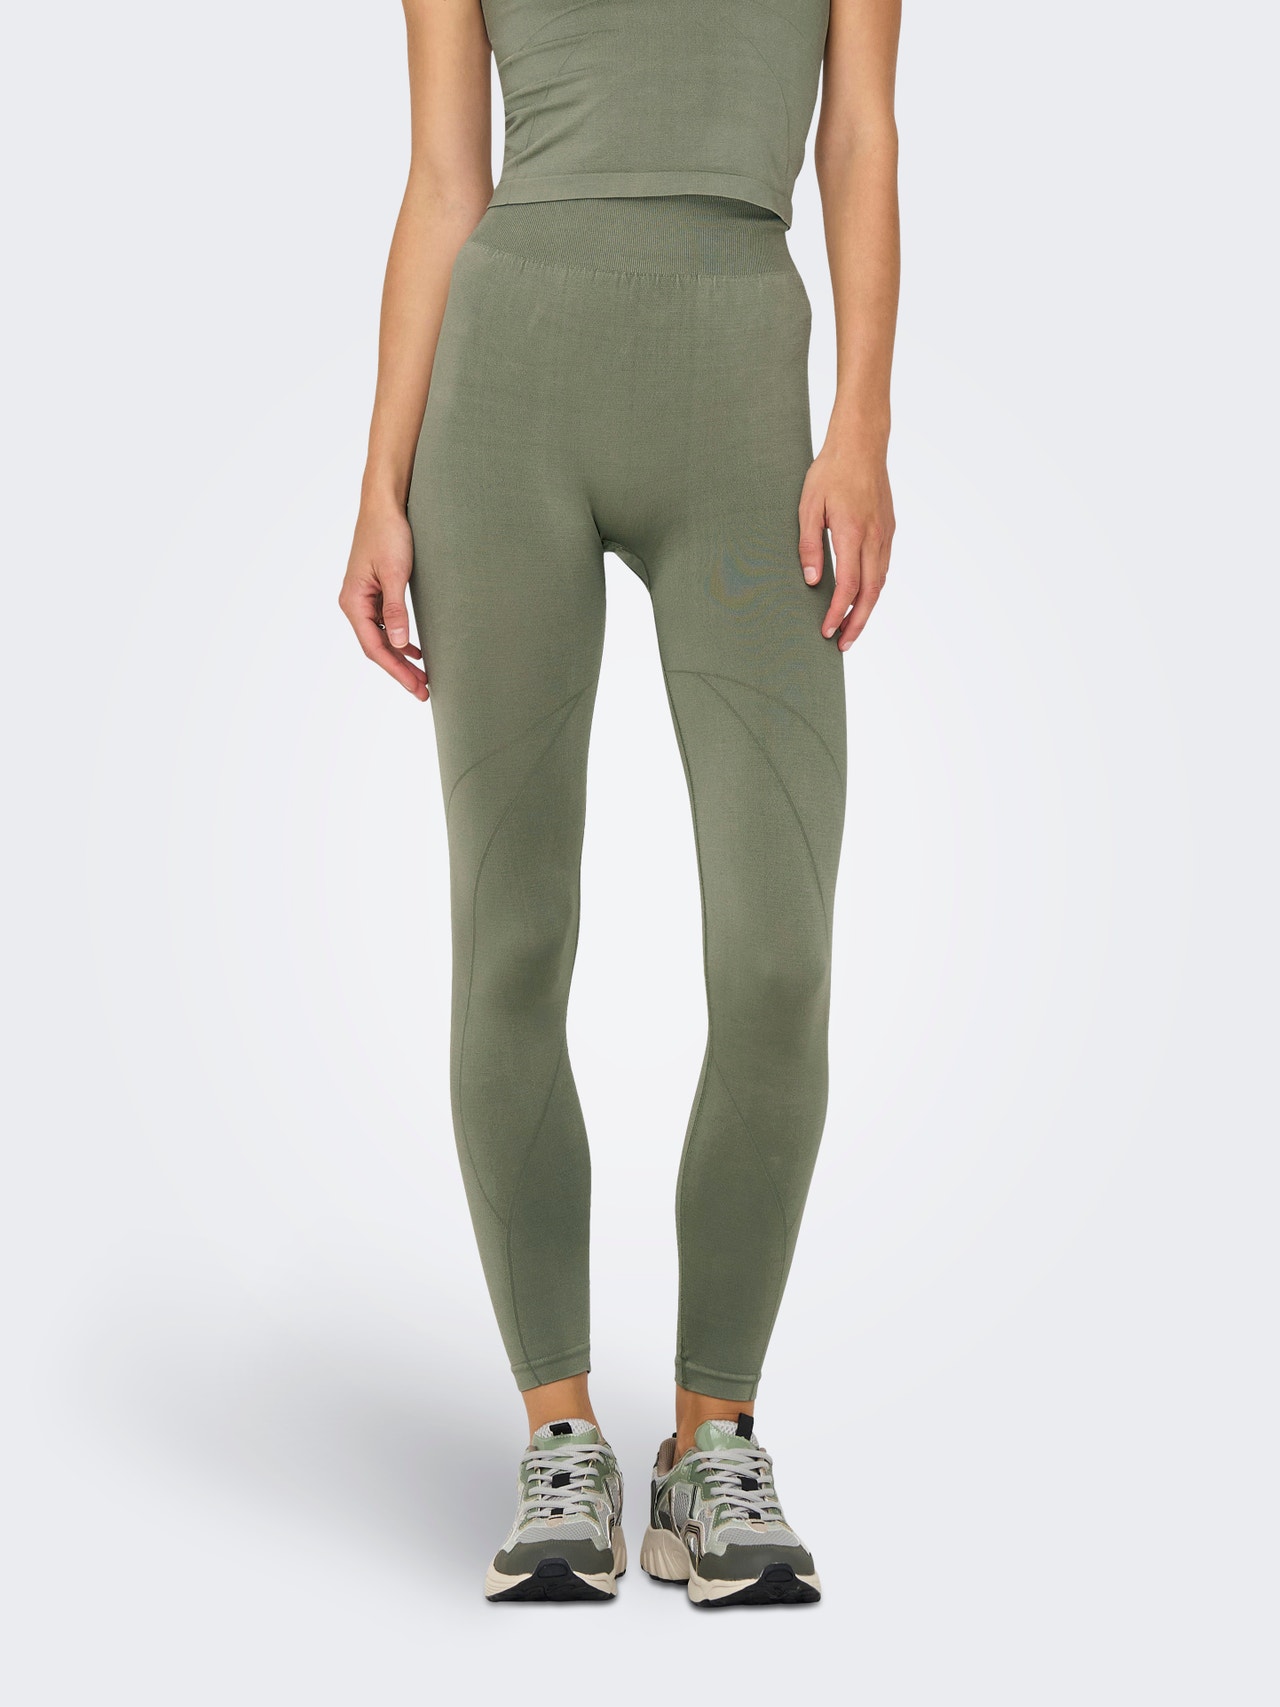 ONLY Tight Fit High waist Leggings -Dusty Olive - 15296999